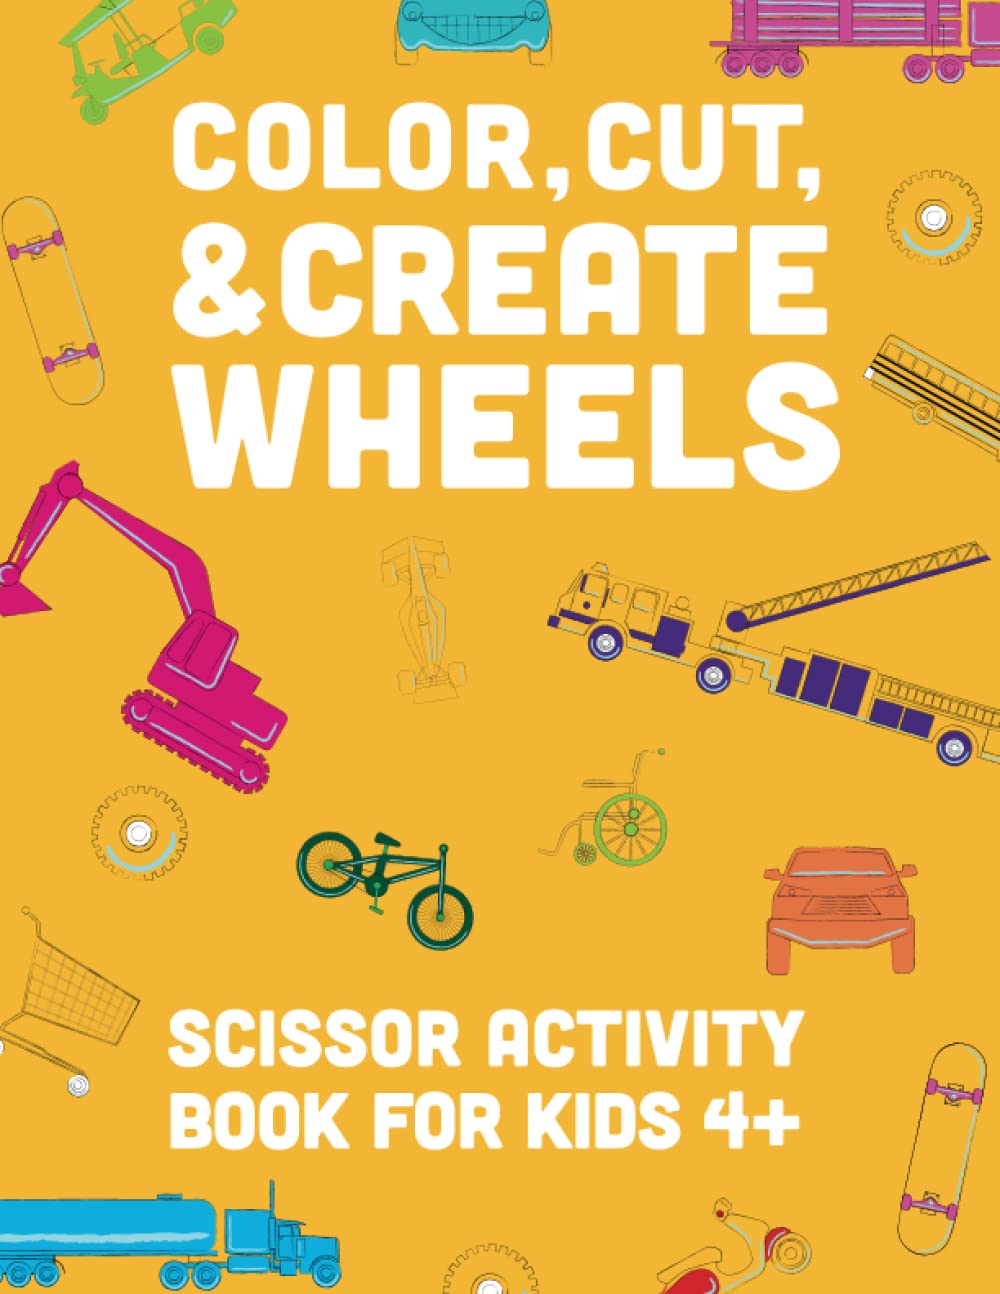 Color, Cut, & Create Kitchen: Scissor Activity Book For Kids – Hammer and  Jacks